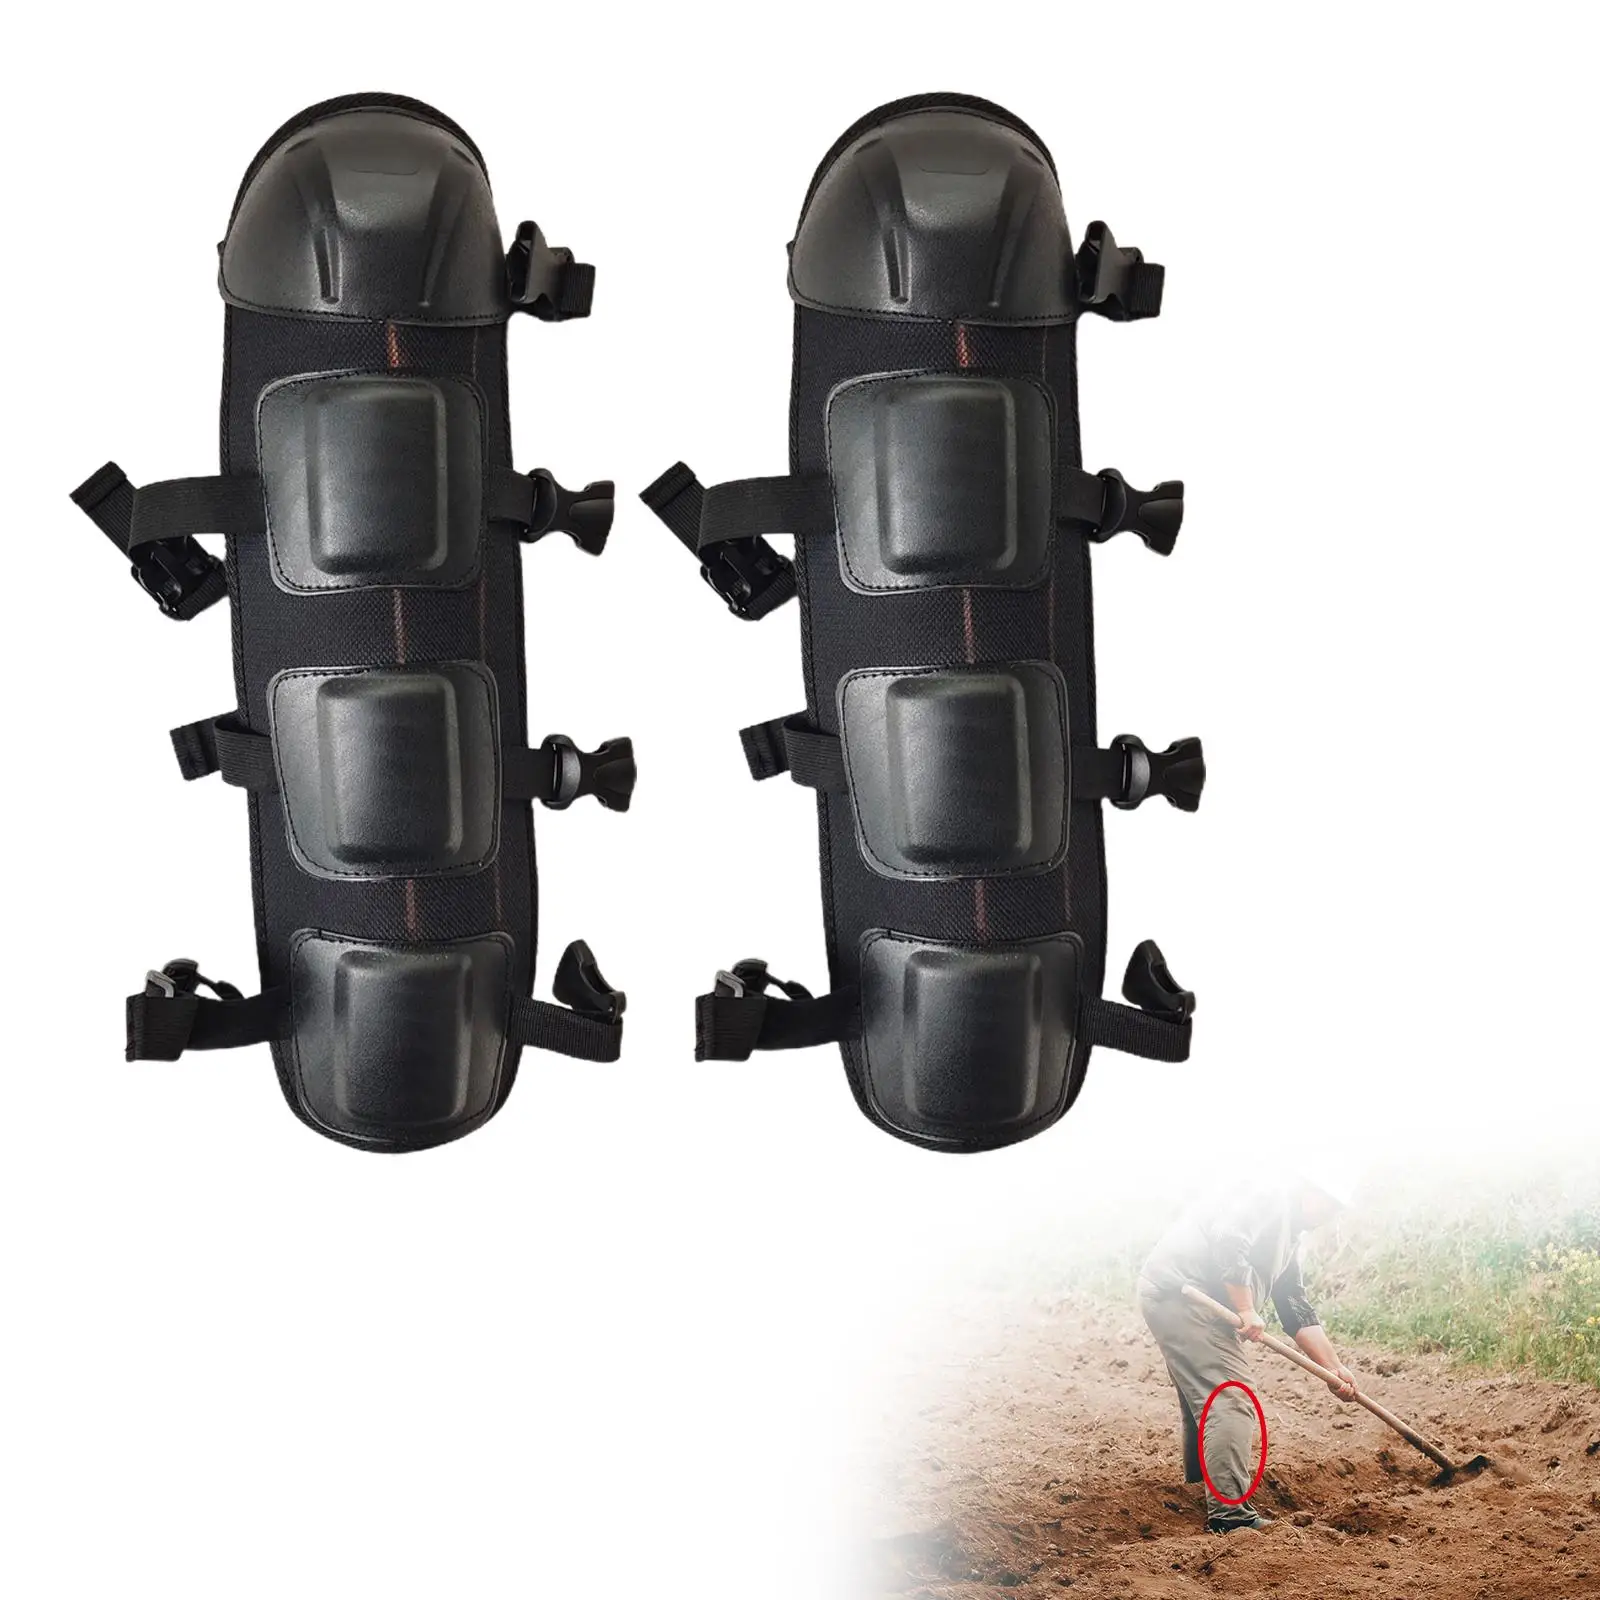 Knee Pads Protective Kneelet Protective Gear Adjustable Straps for Construction